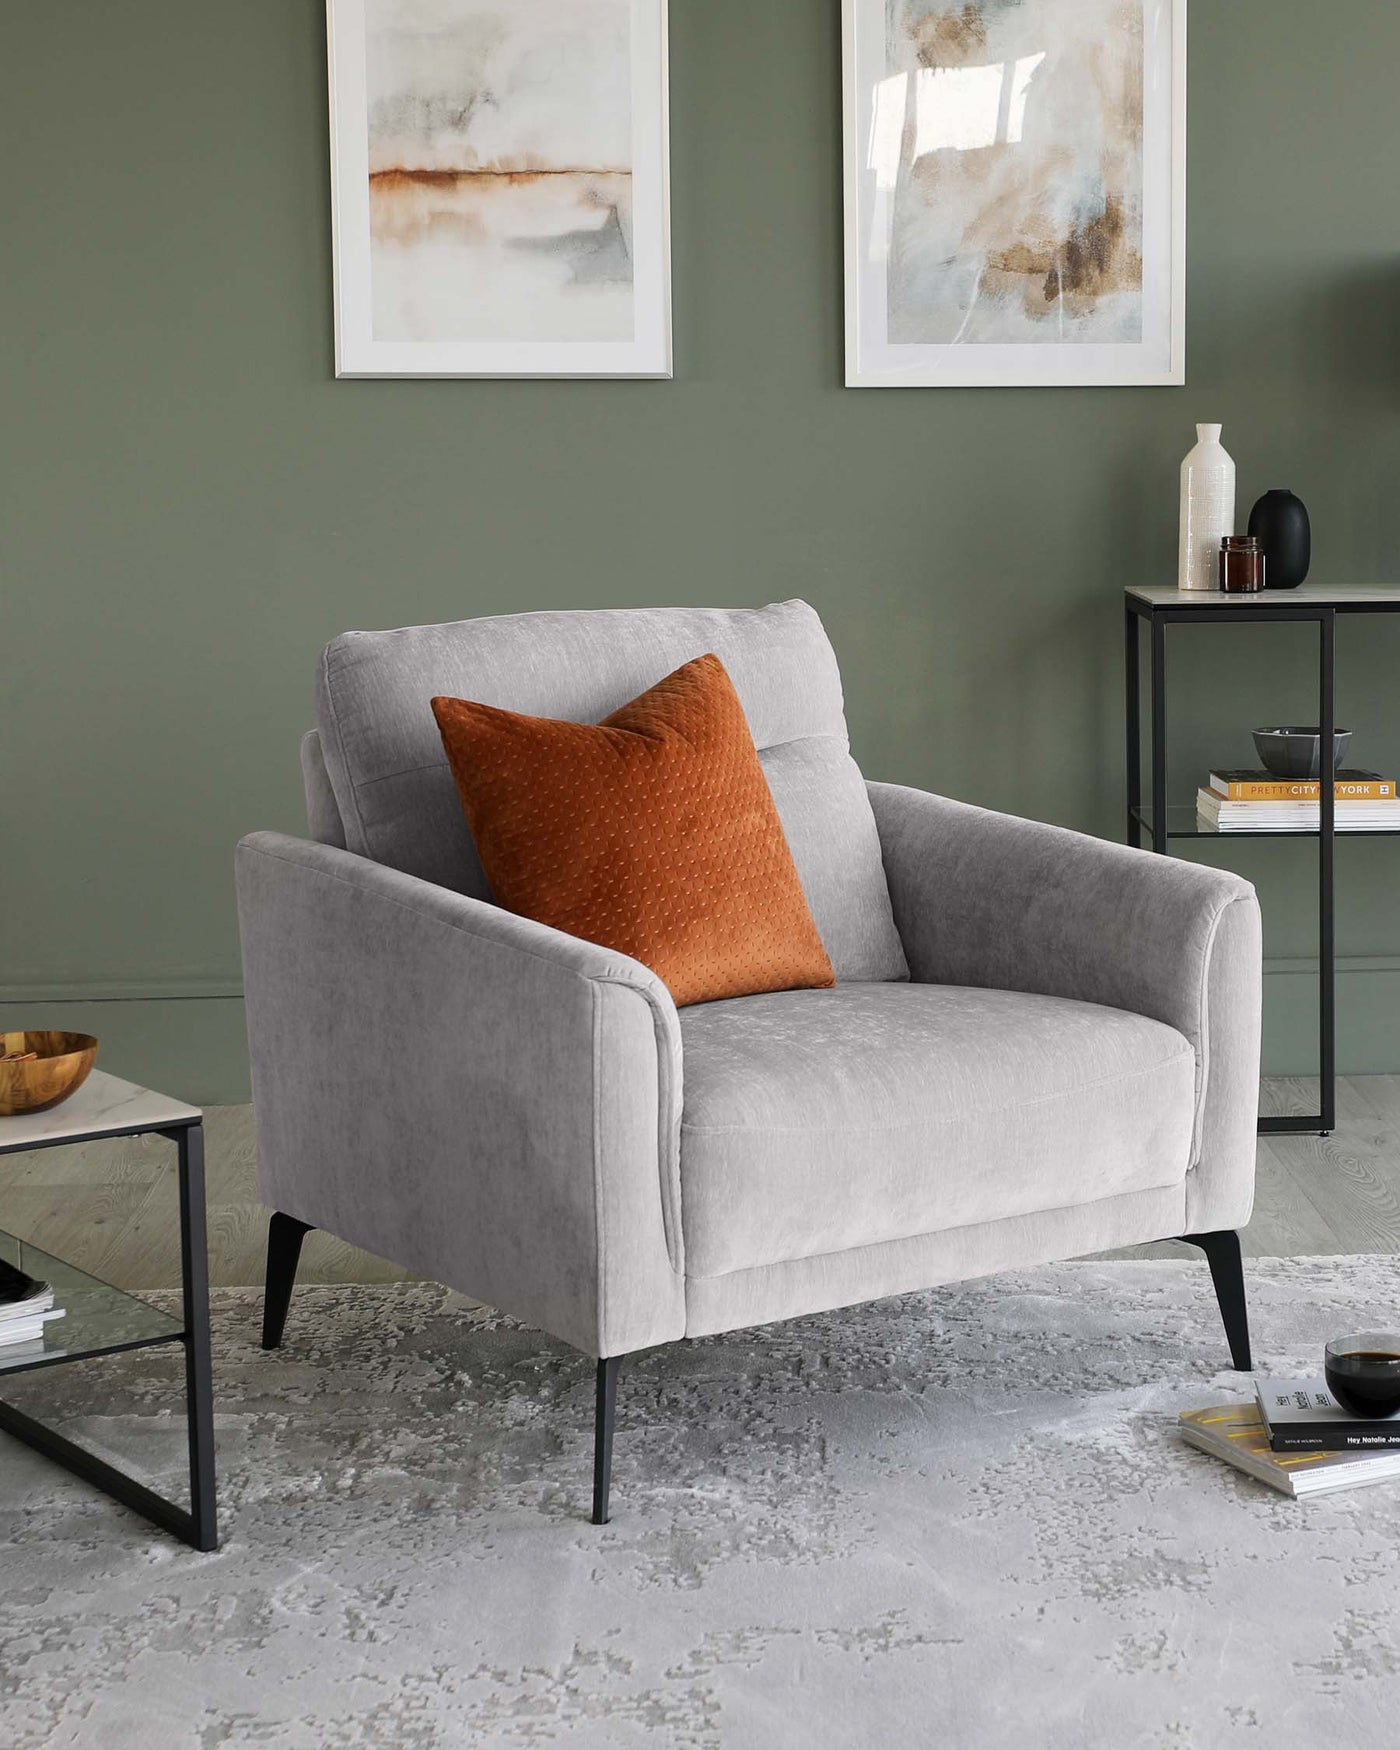 Elegant modern armchair with light grey upholstery and black legs, accompanied by a burnt orange decorative pillow. Adjacent is a minimalist black metal side table with a simple vase, a black decorative object, and a stack of books. The setting is complemented by abstract wall art and a textured grey area rug.